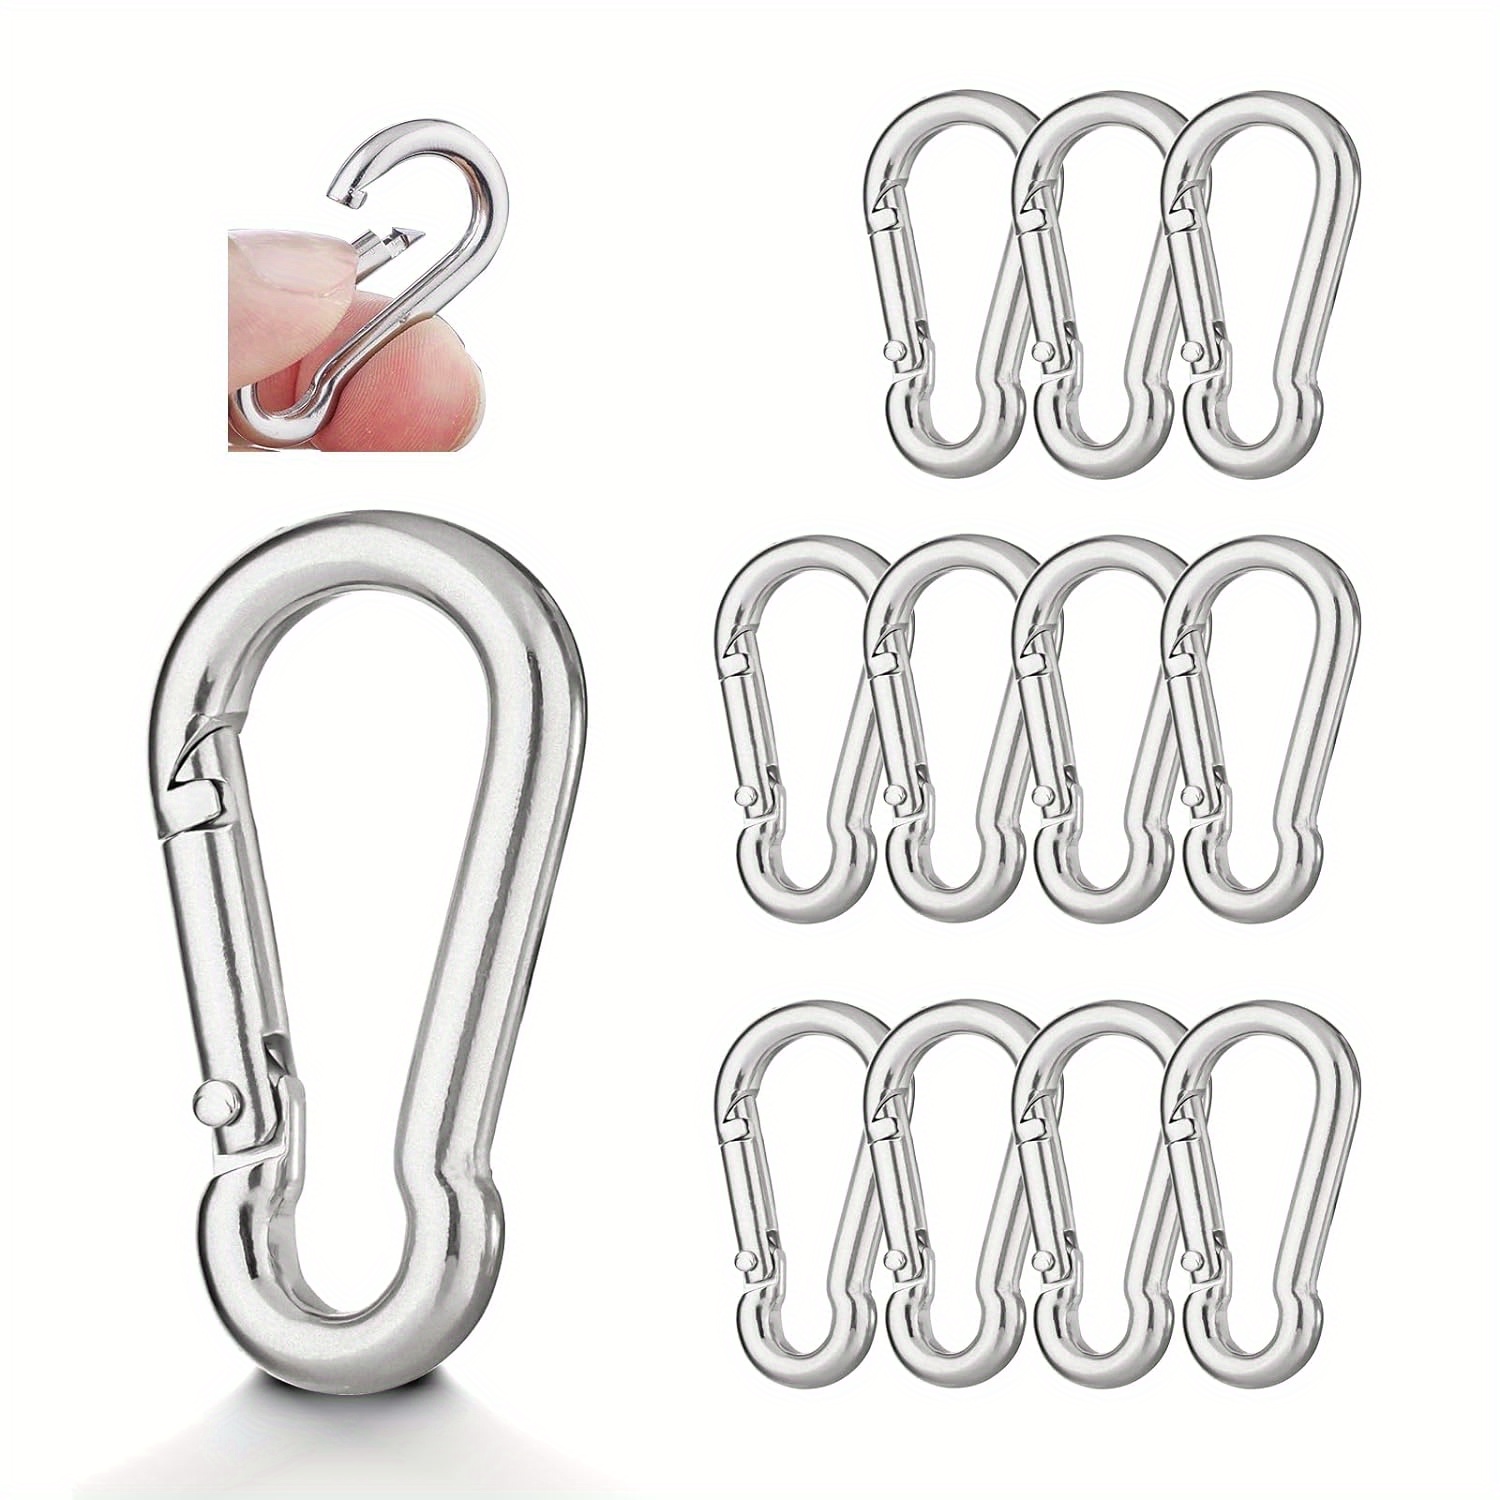 Spring Snap Hooks Carabiner Clips Stainless Steel Clip Quick